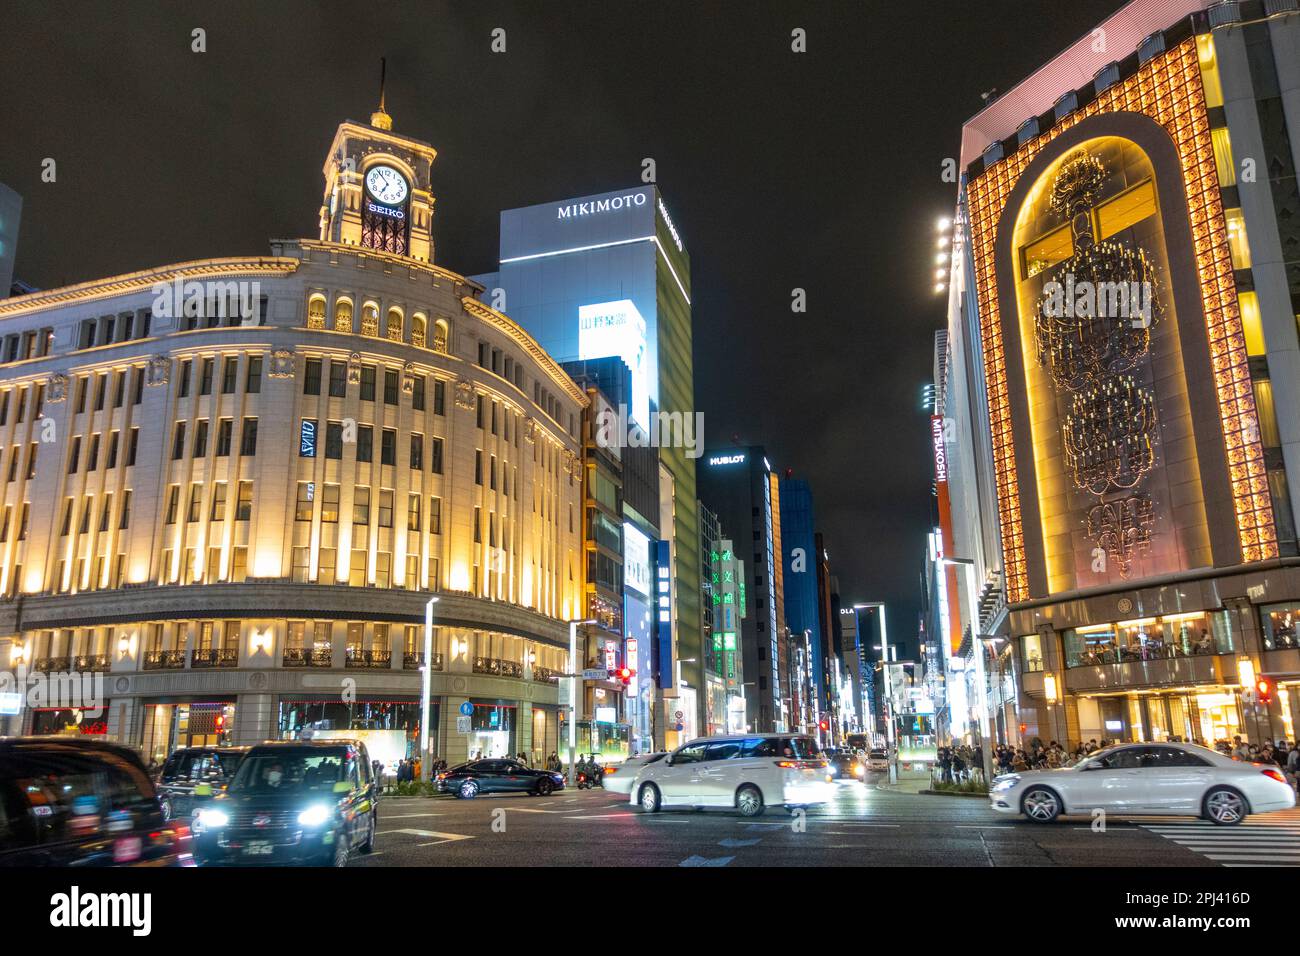 Exterior view at night of Wako and Mitsukoshi department stores in Ginza, Tokyo, Japan Stock Photo